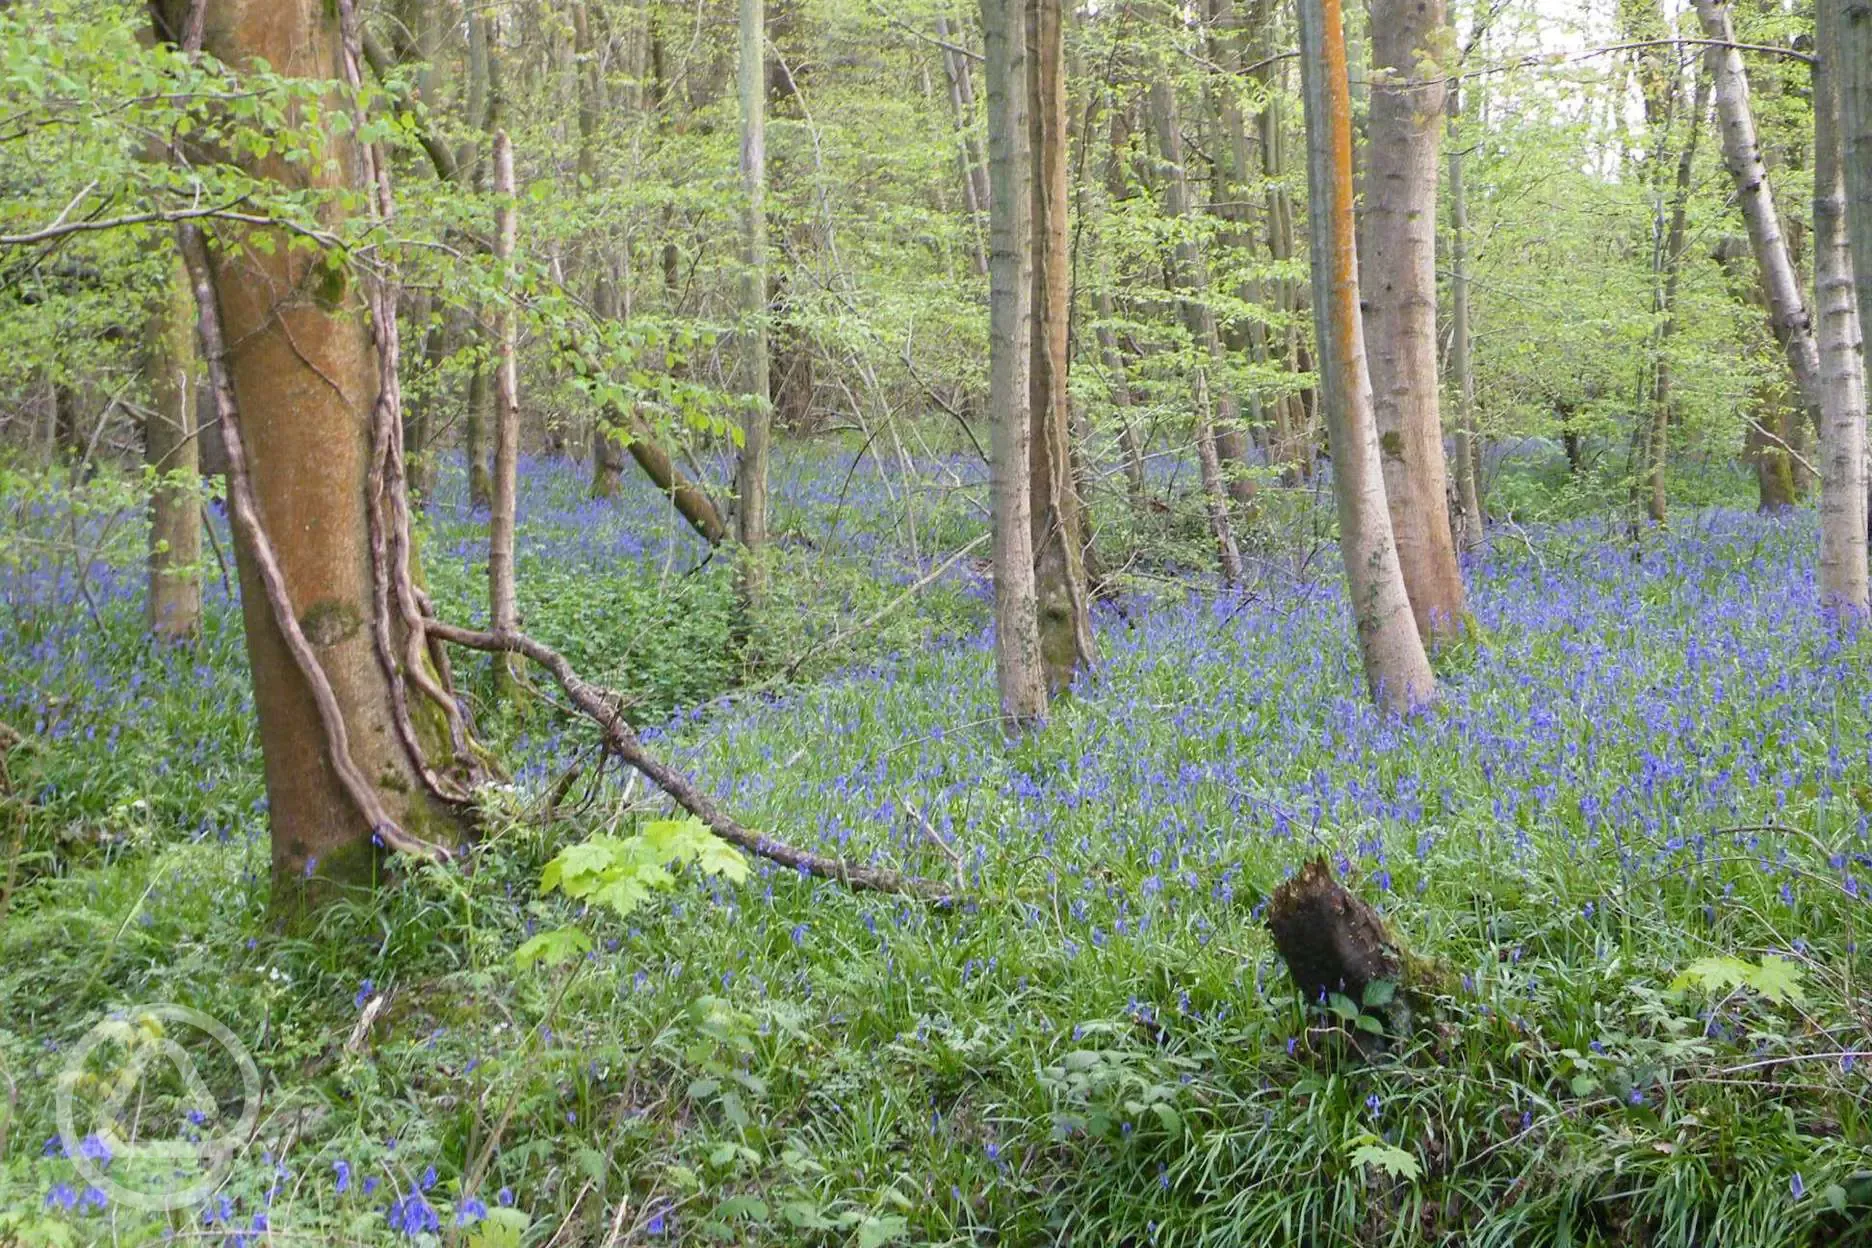 The 50 acres of woodland are filled with bluebells in the spring